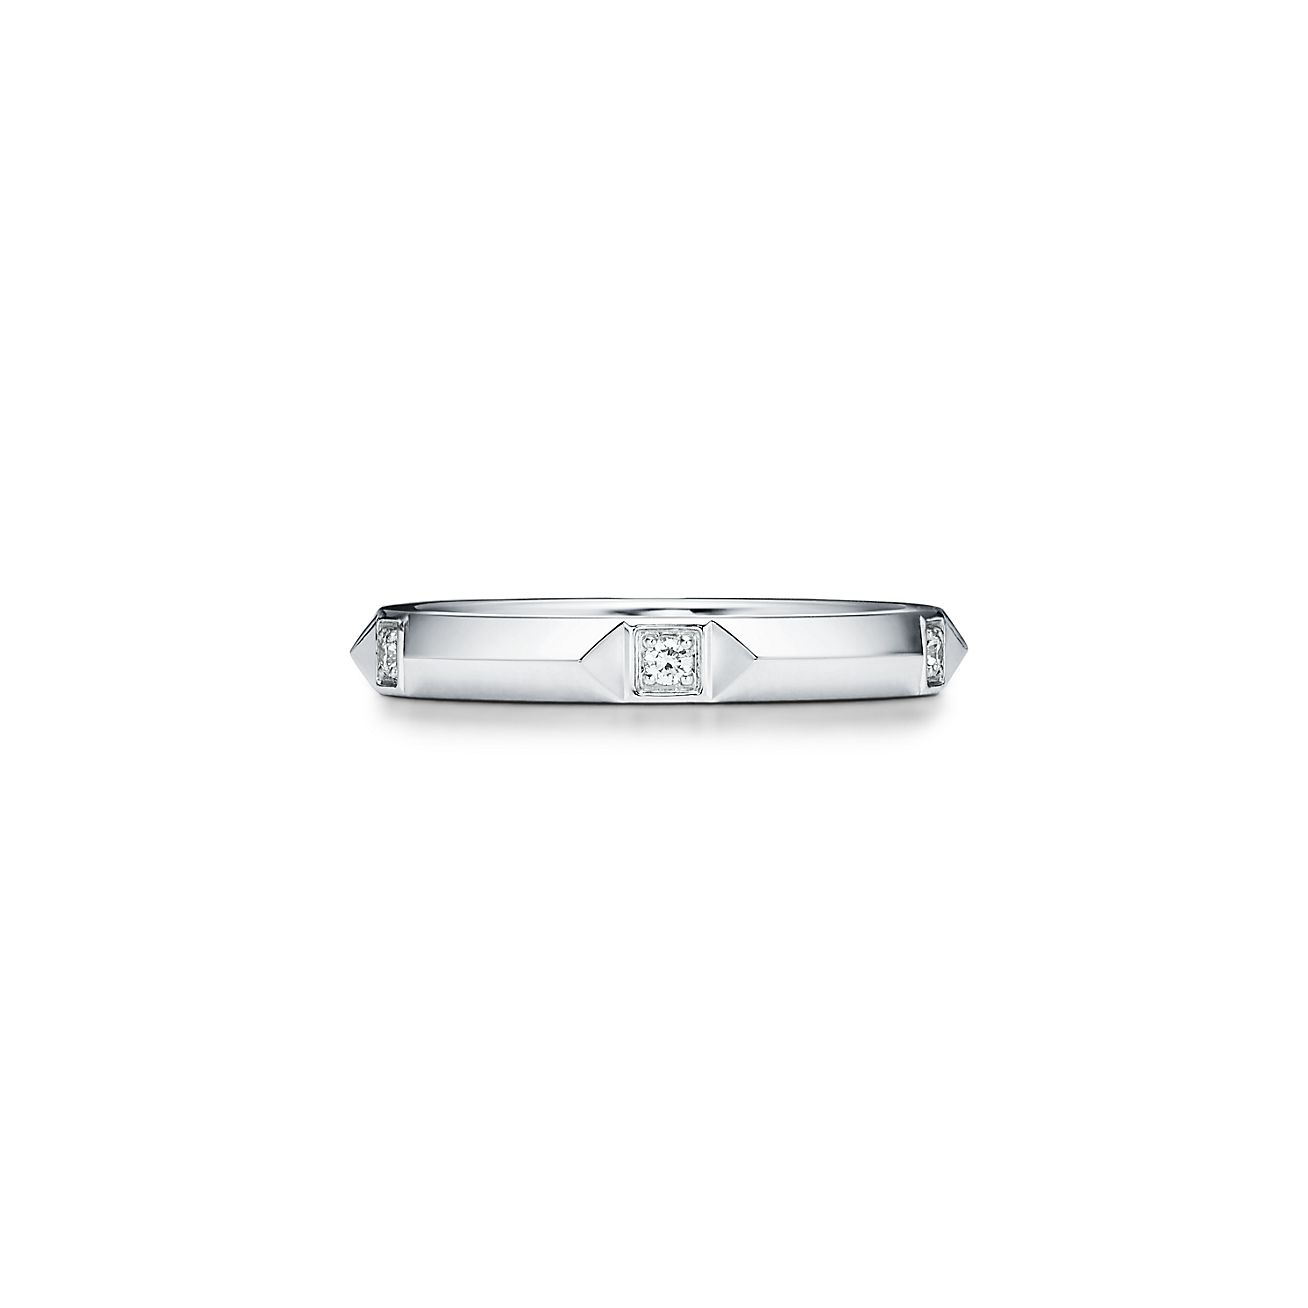 Tiffany True® band ring in platinum with diamonds, 2.5 mm wide